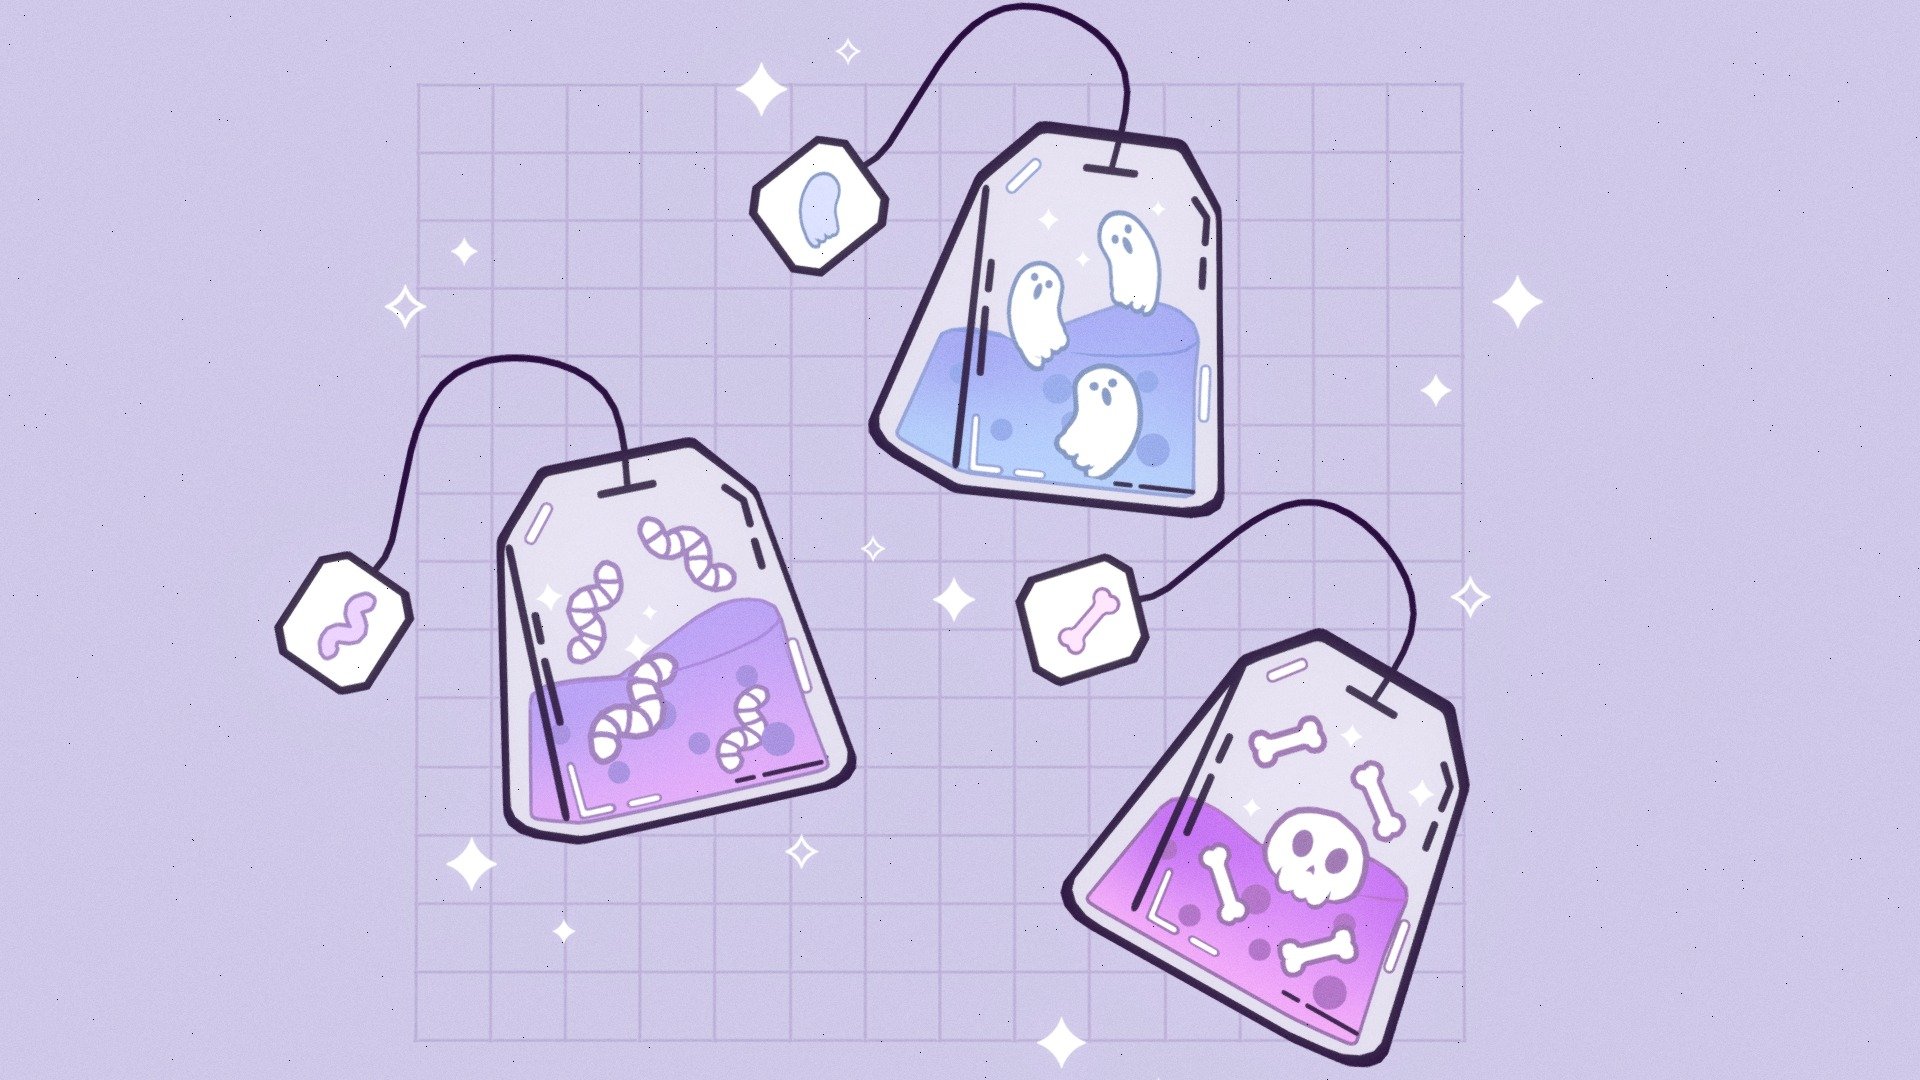 Even though it's unfortunately not halloween yet, I felt like making something spooky!! I love how cute the ghosts are in these teabags :･ﾟ✧:･ﾟ✧

The amazing concept is by Jeanette
Concept by - Spooky halloween teabags ✧ - Download Free 3D model by Moon (@Moon_solstice) 3d model